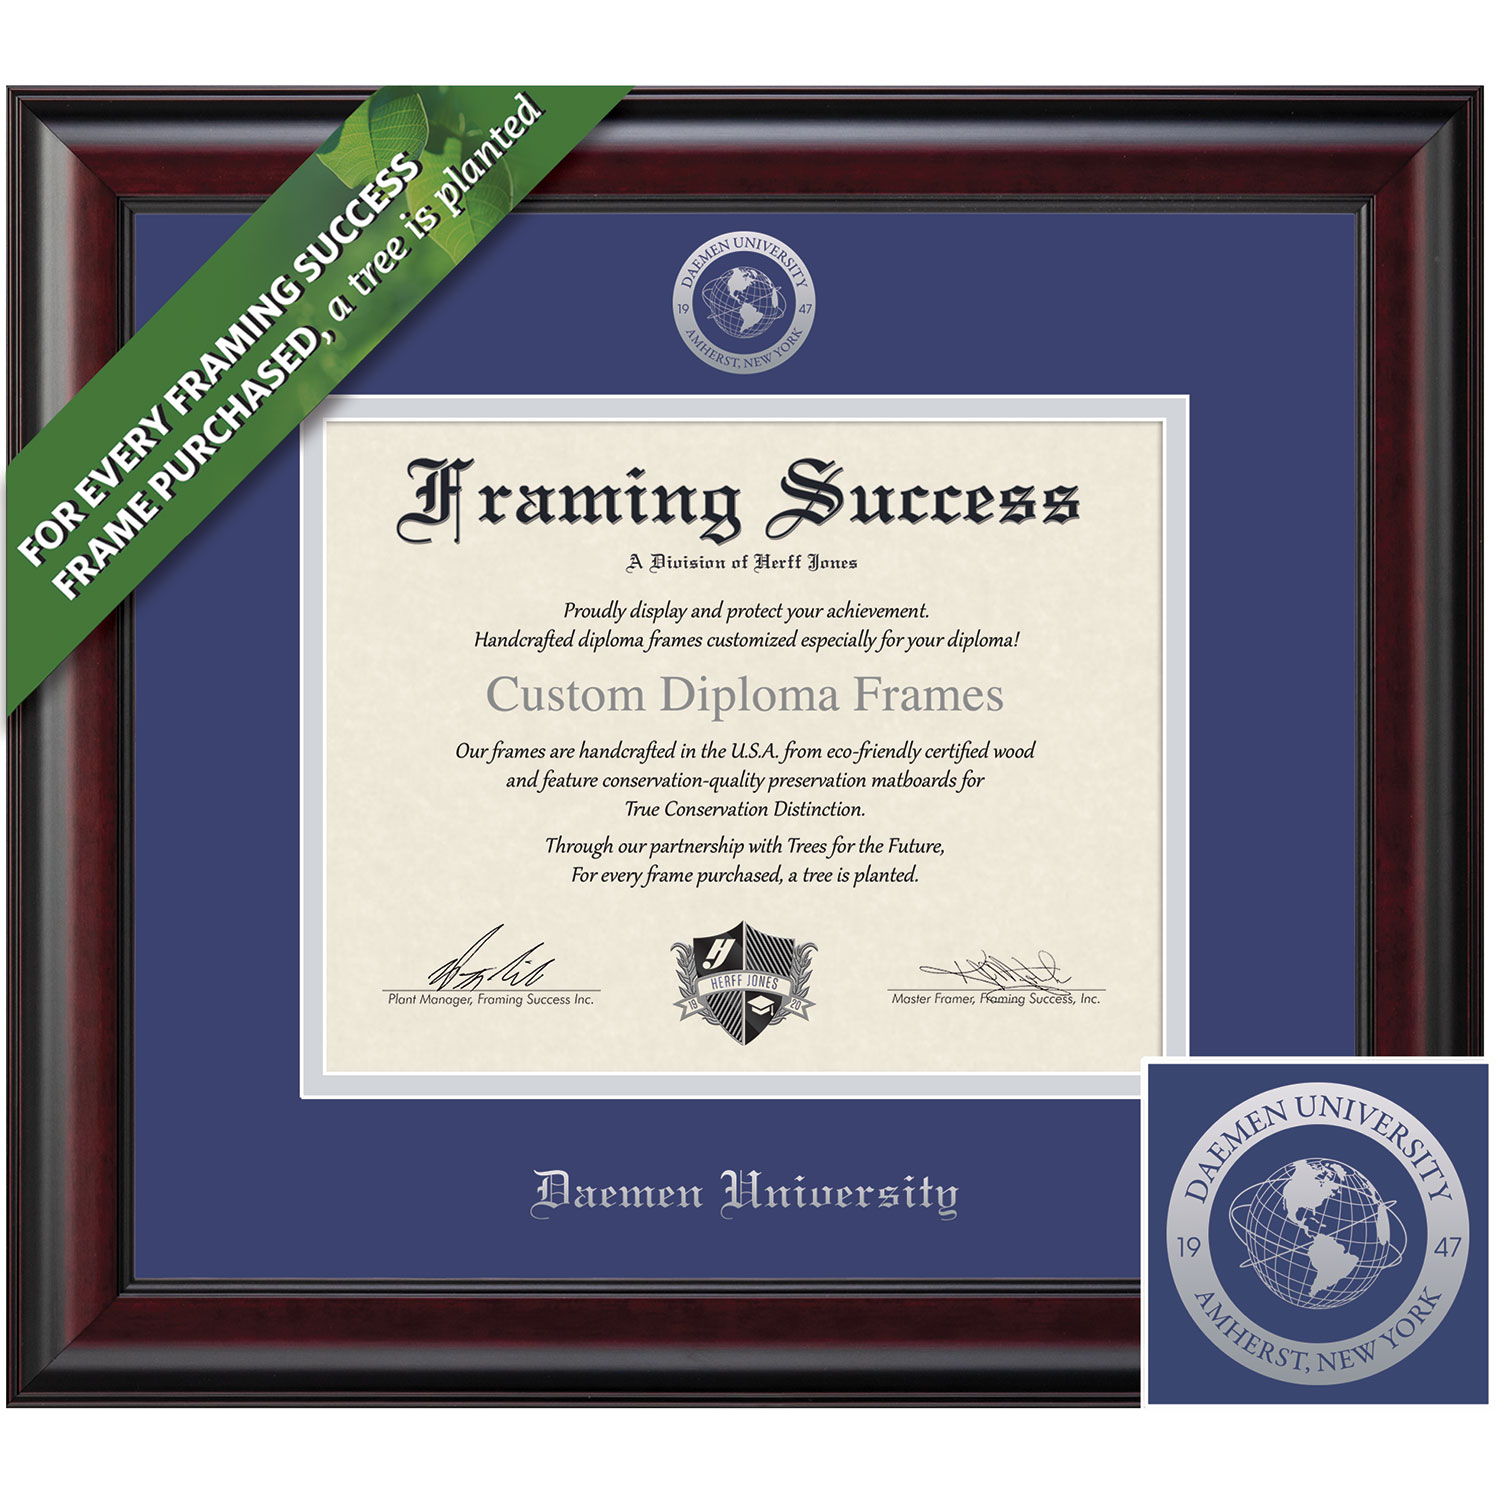 Framing Success 8 x 10 Classic Silver Embossed School Seal Bachelors, Masters Diploma Frame